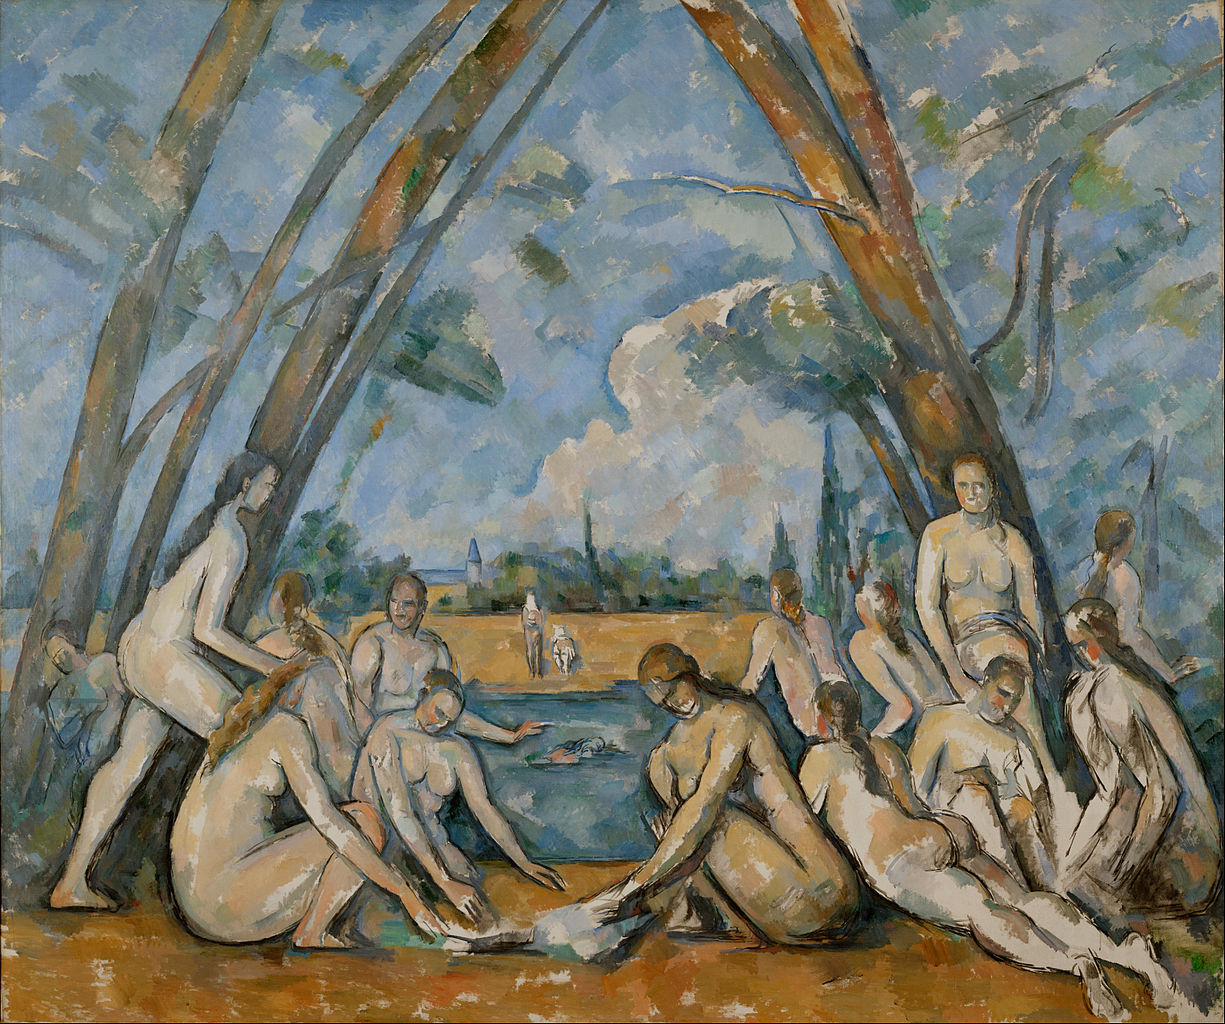 The Great Bathers